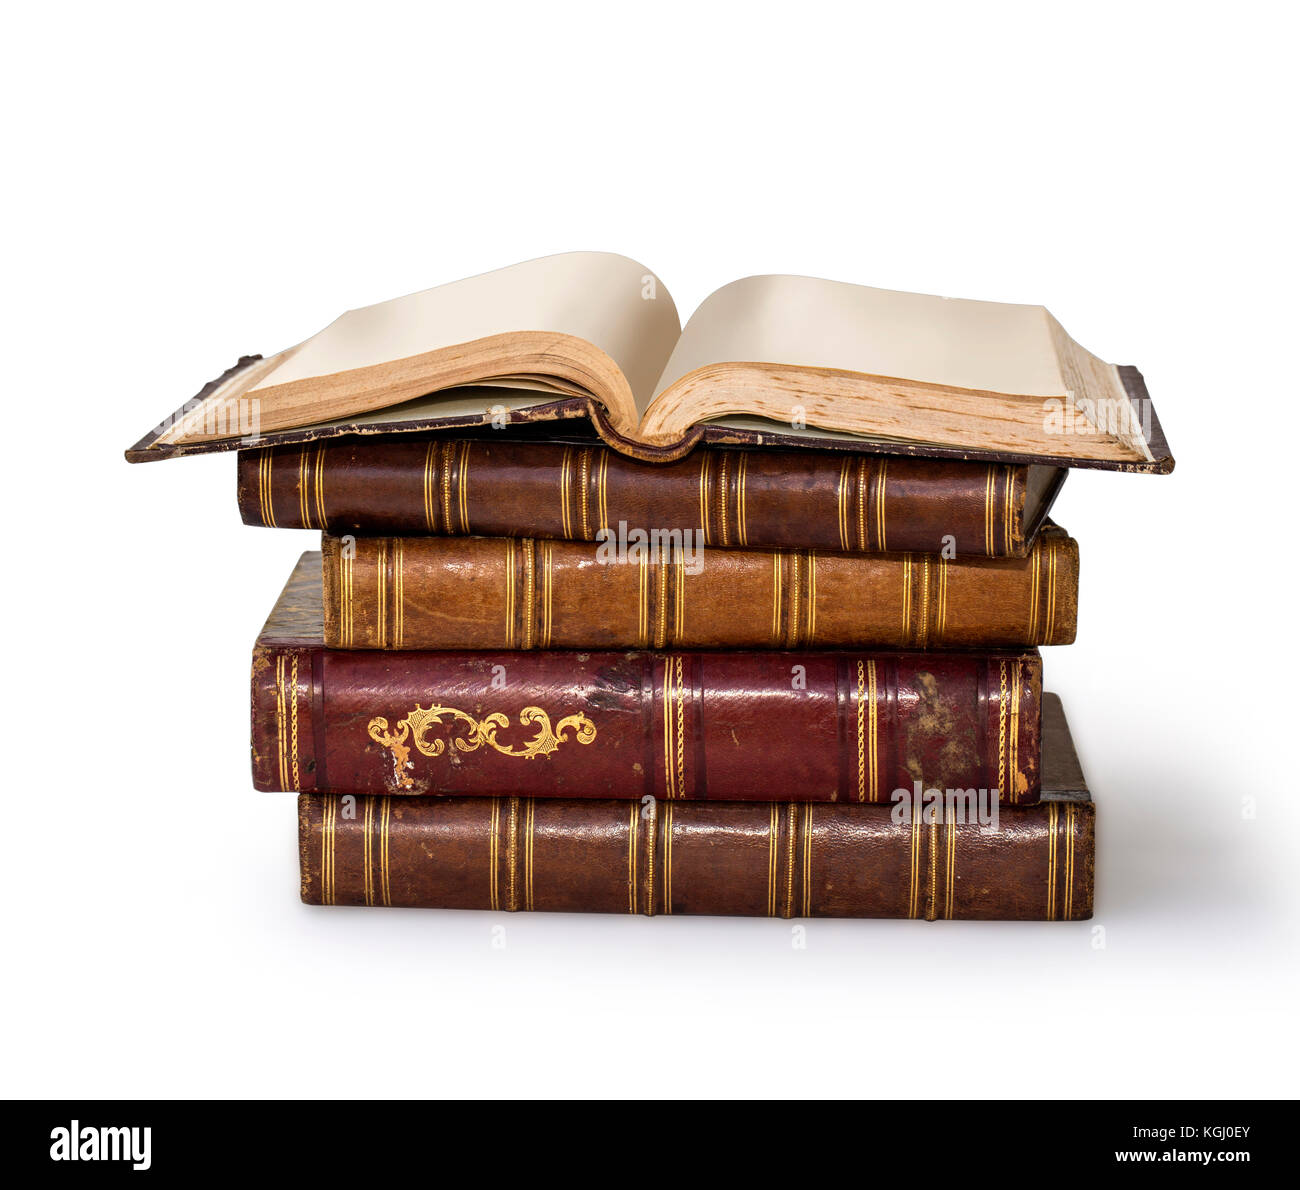 Old books piled together over white background with clipping path Stock Photo